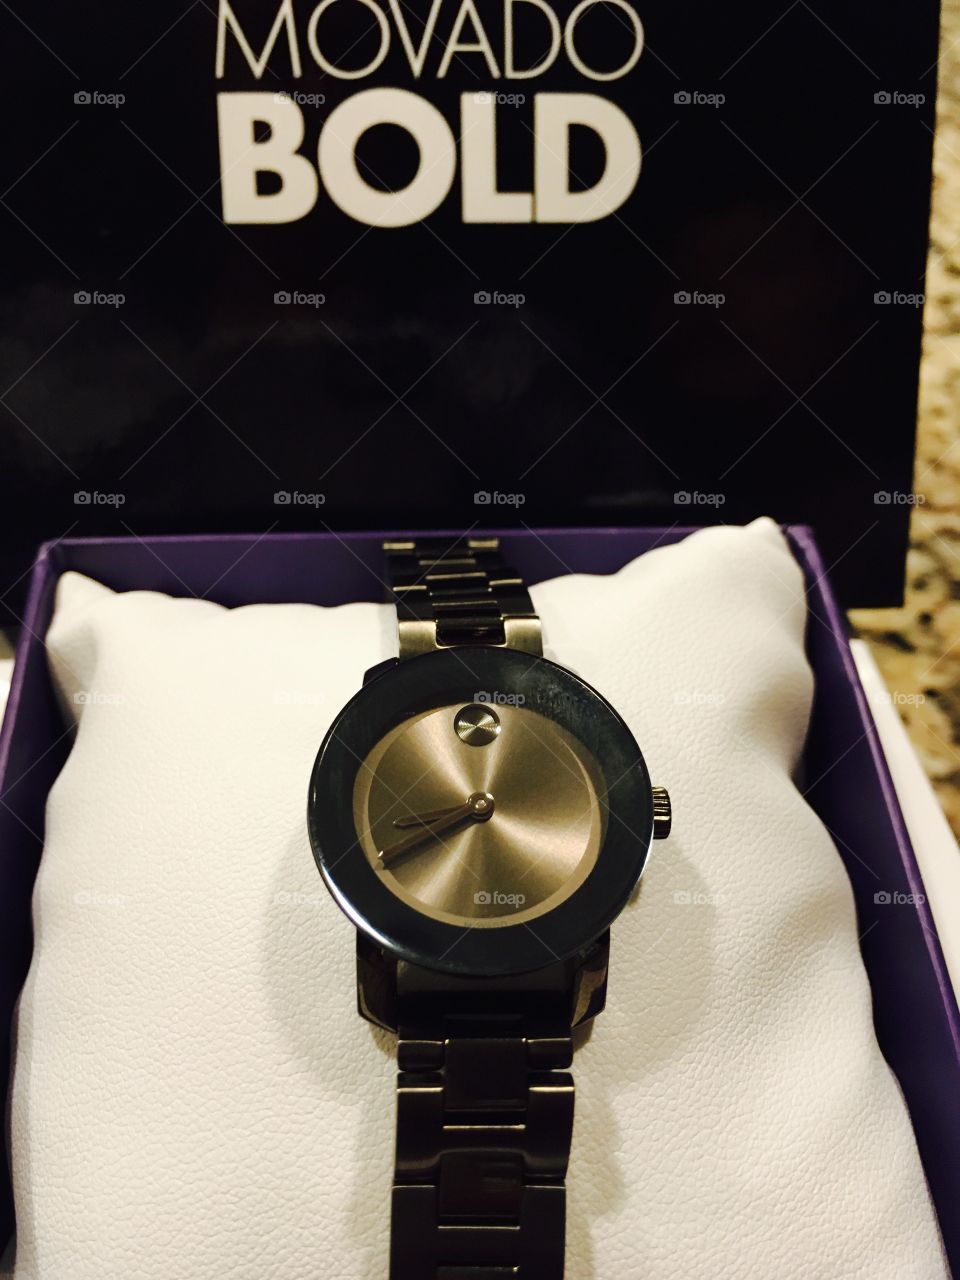 Watch by Movado